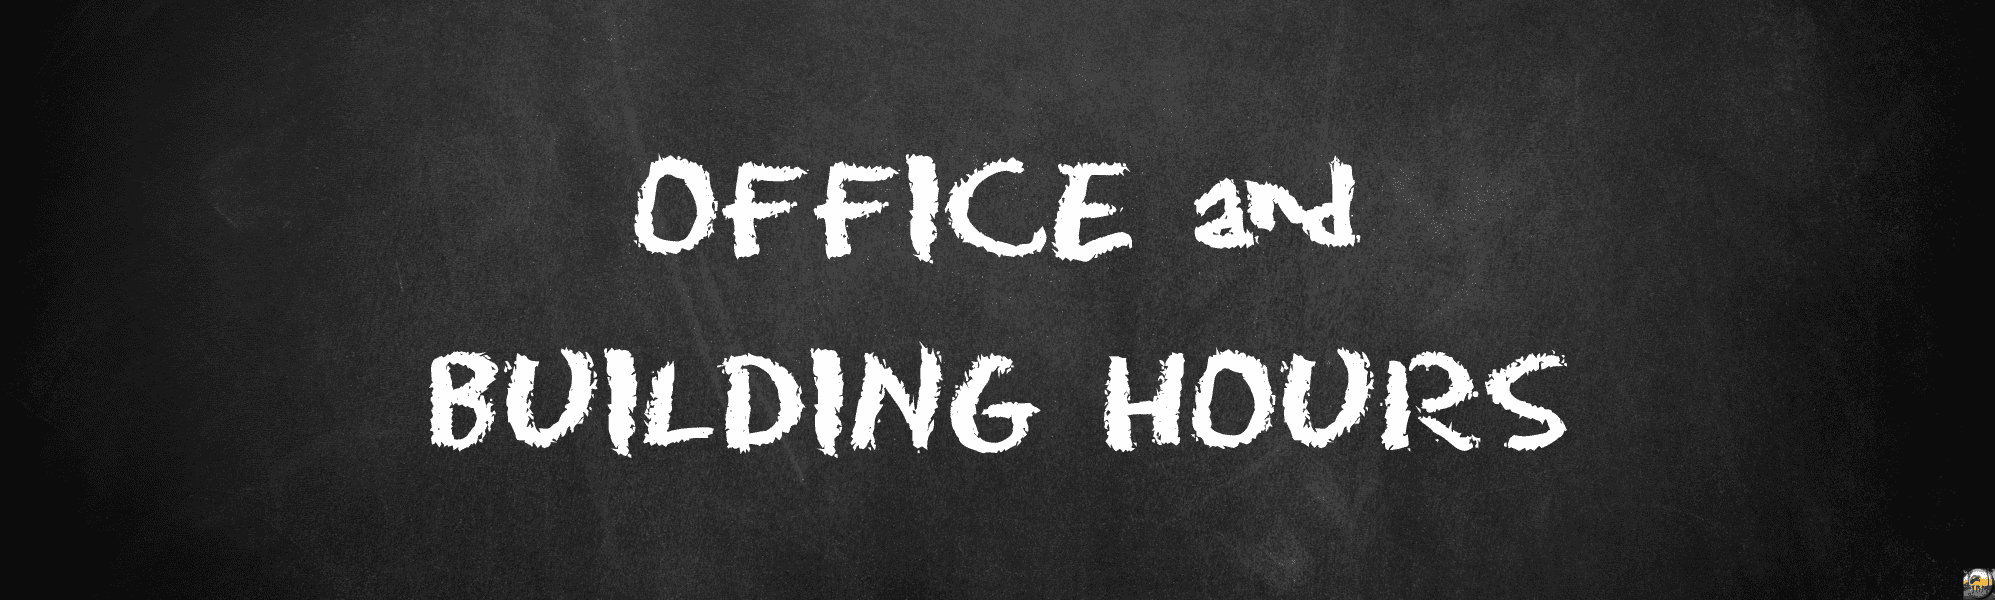 Office and Building Hours